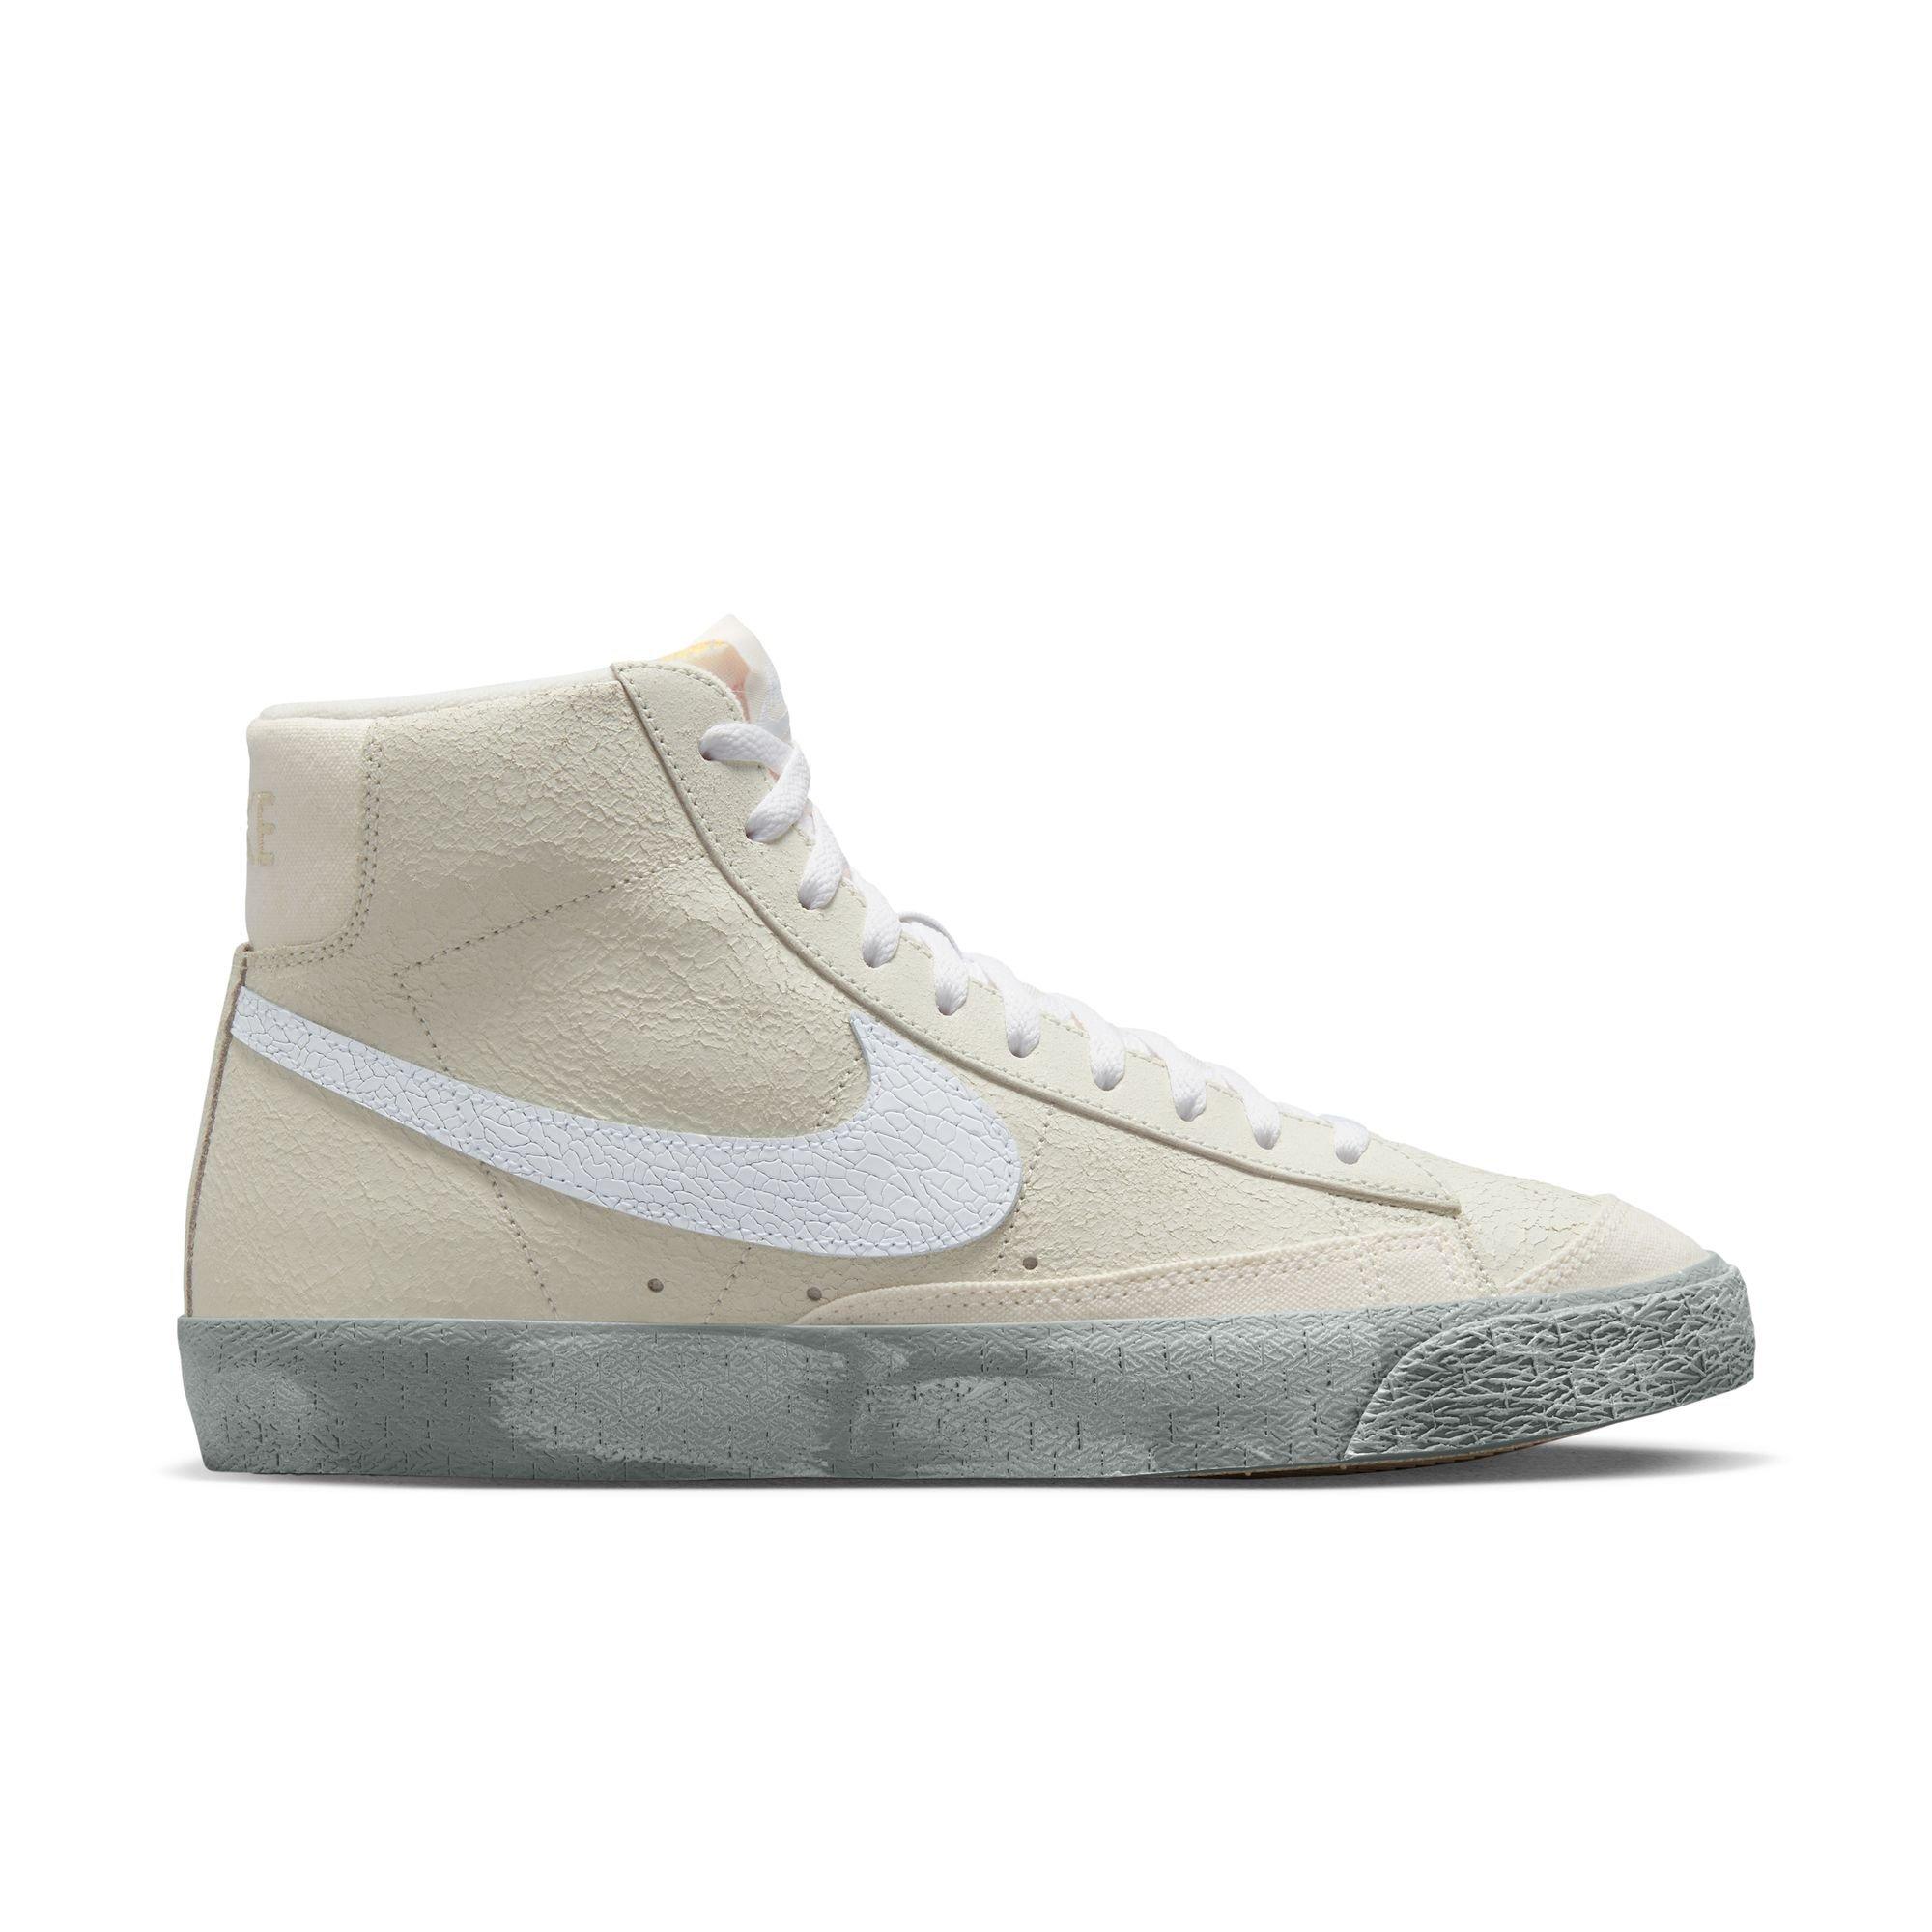 Nike Blazer Mid EMB Summit White Review& On foot 